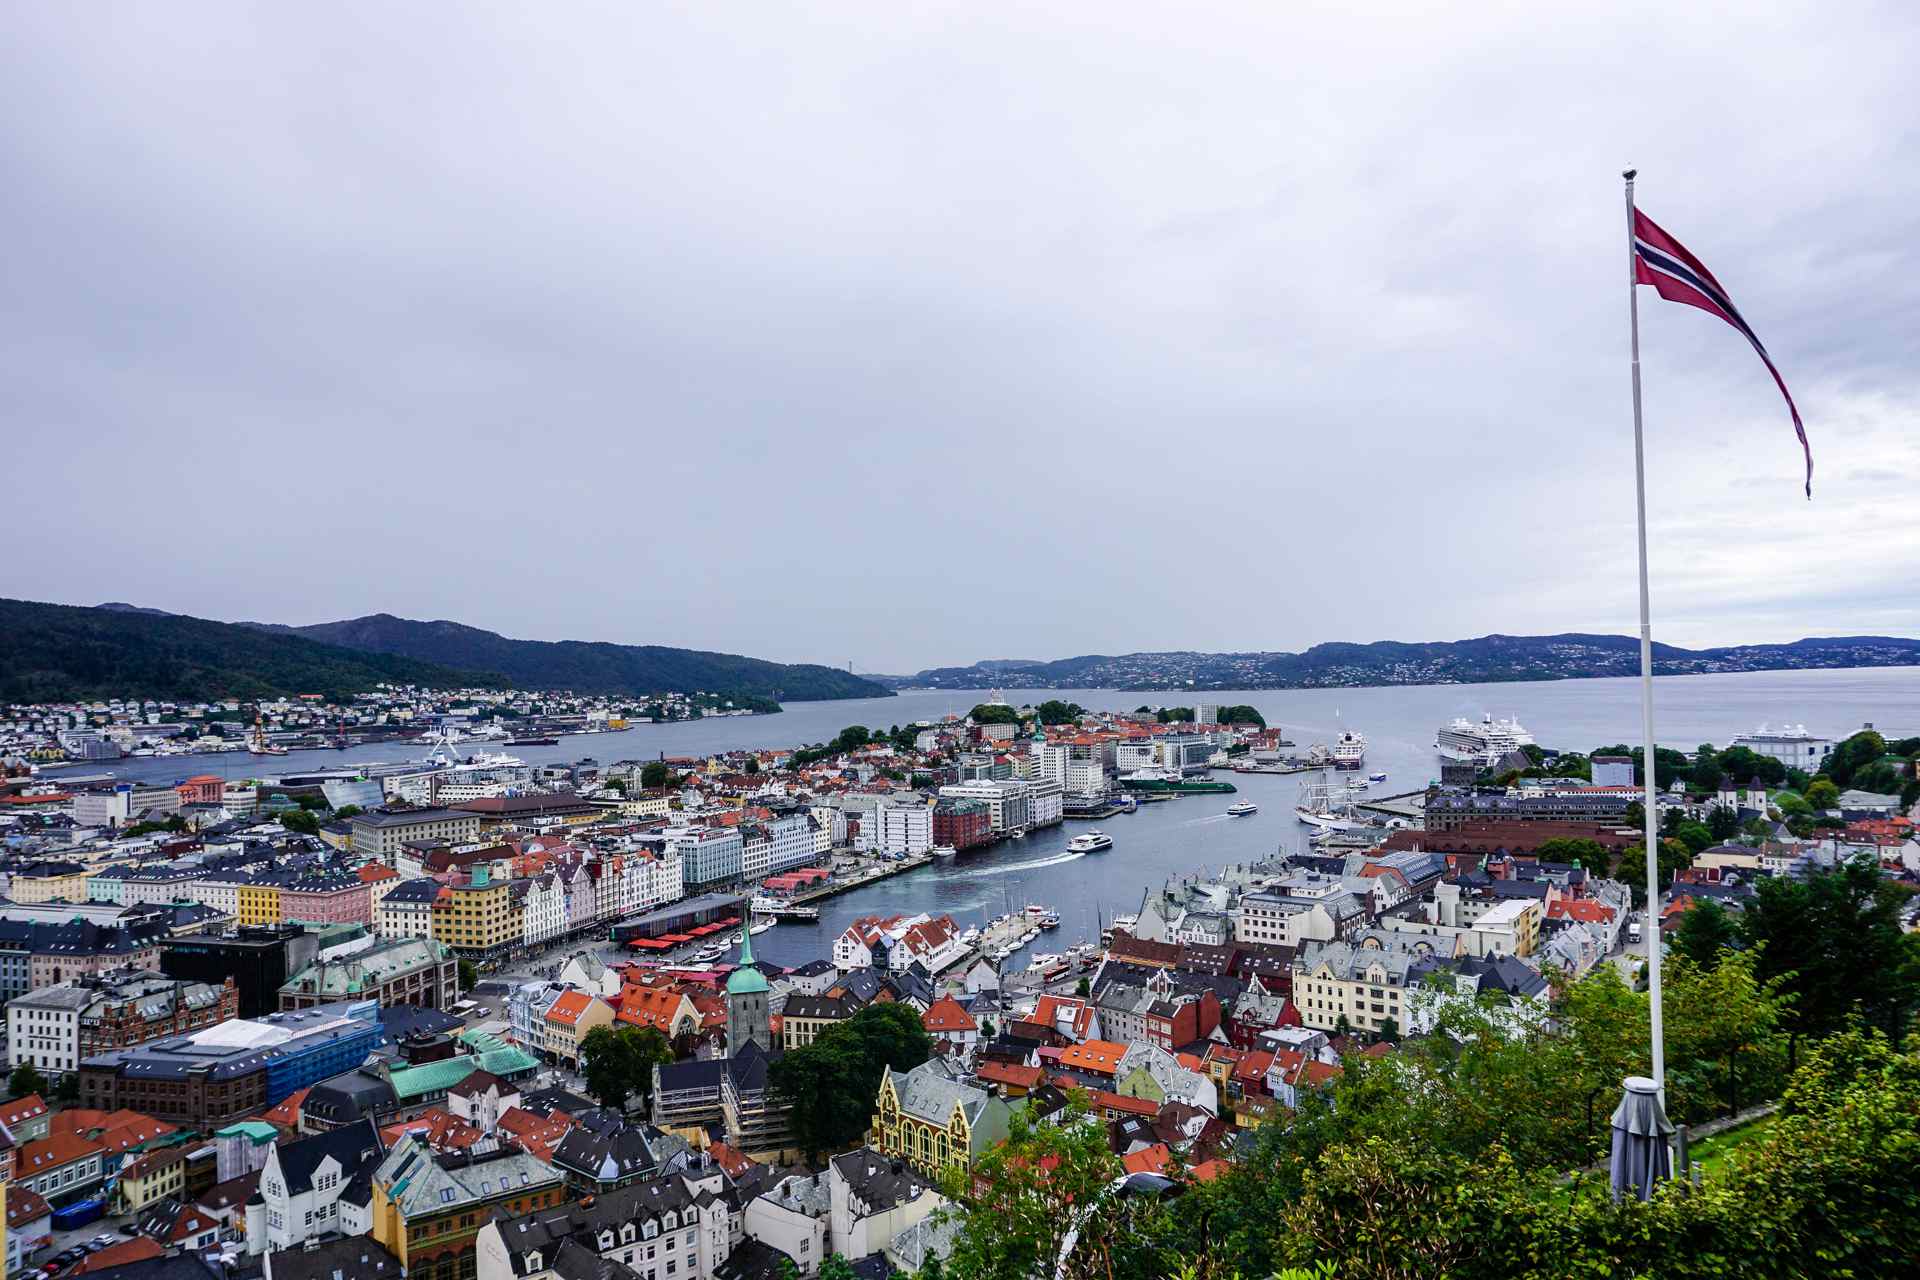 A picture of the Norwegian flag with the Bergen Harbor and buildings in the background.